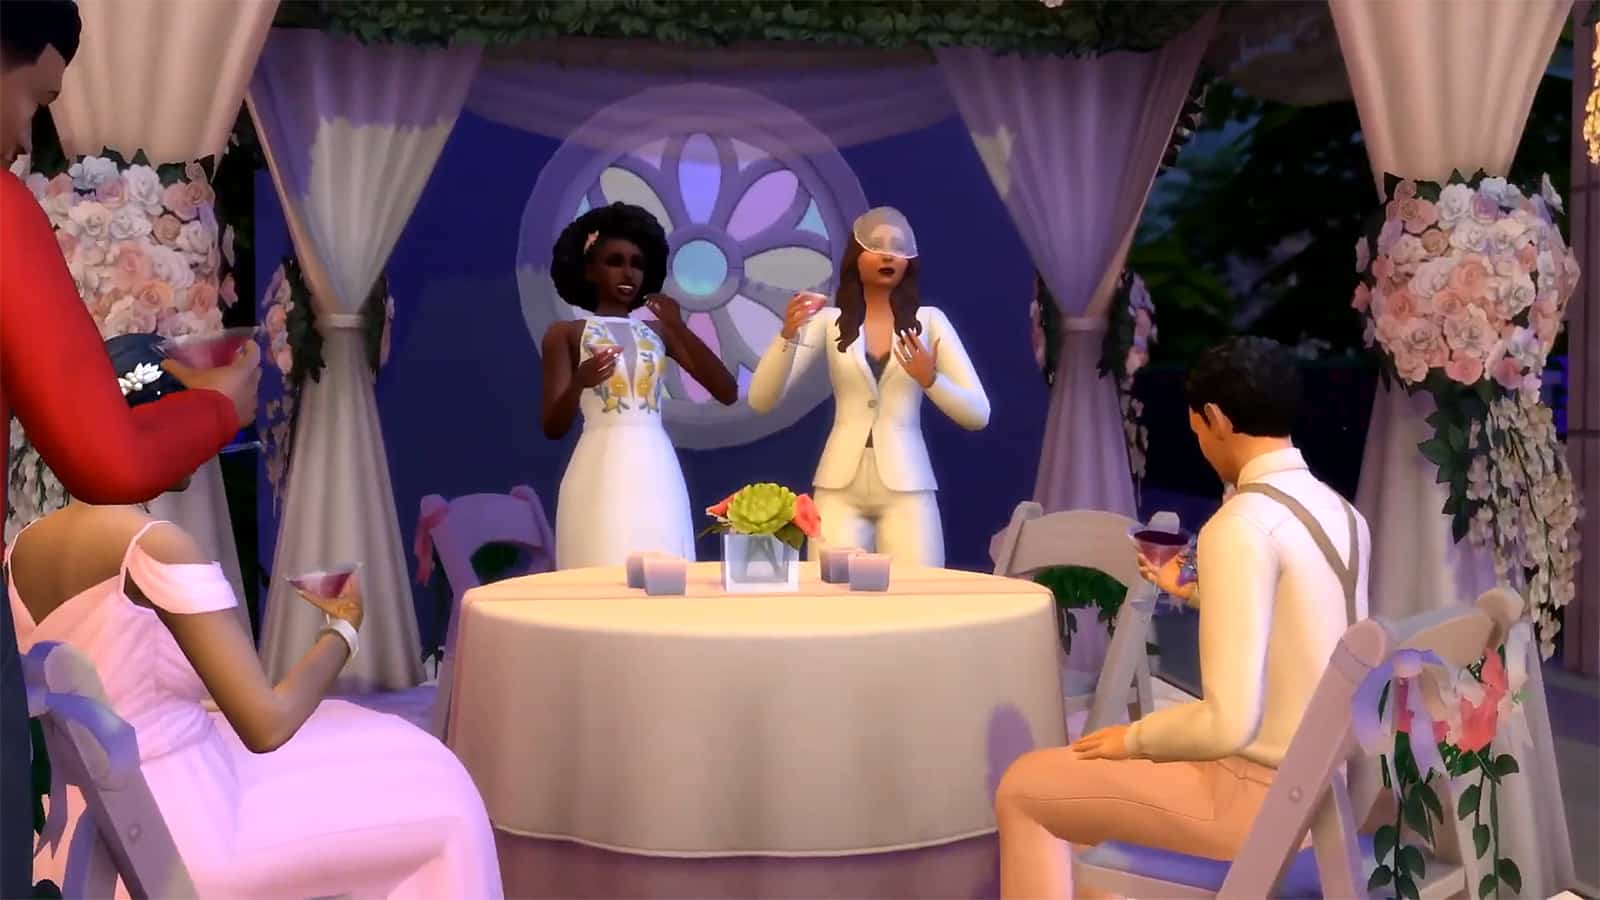 An image of a reception party in The Sims 4 My Wedding Stories